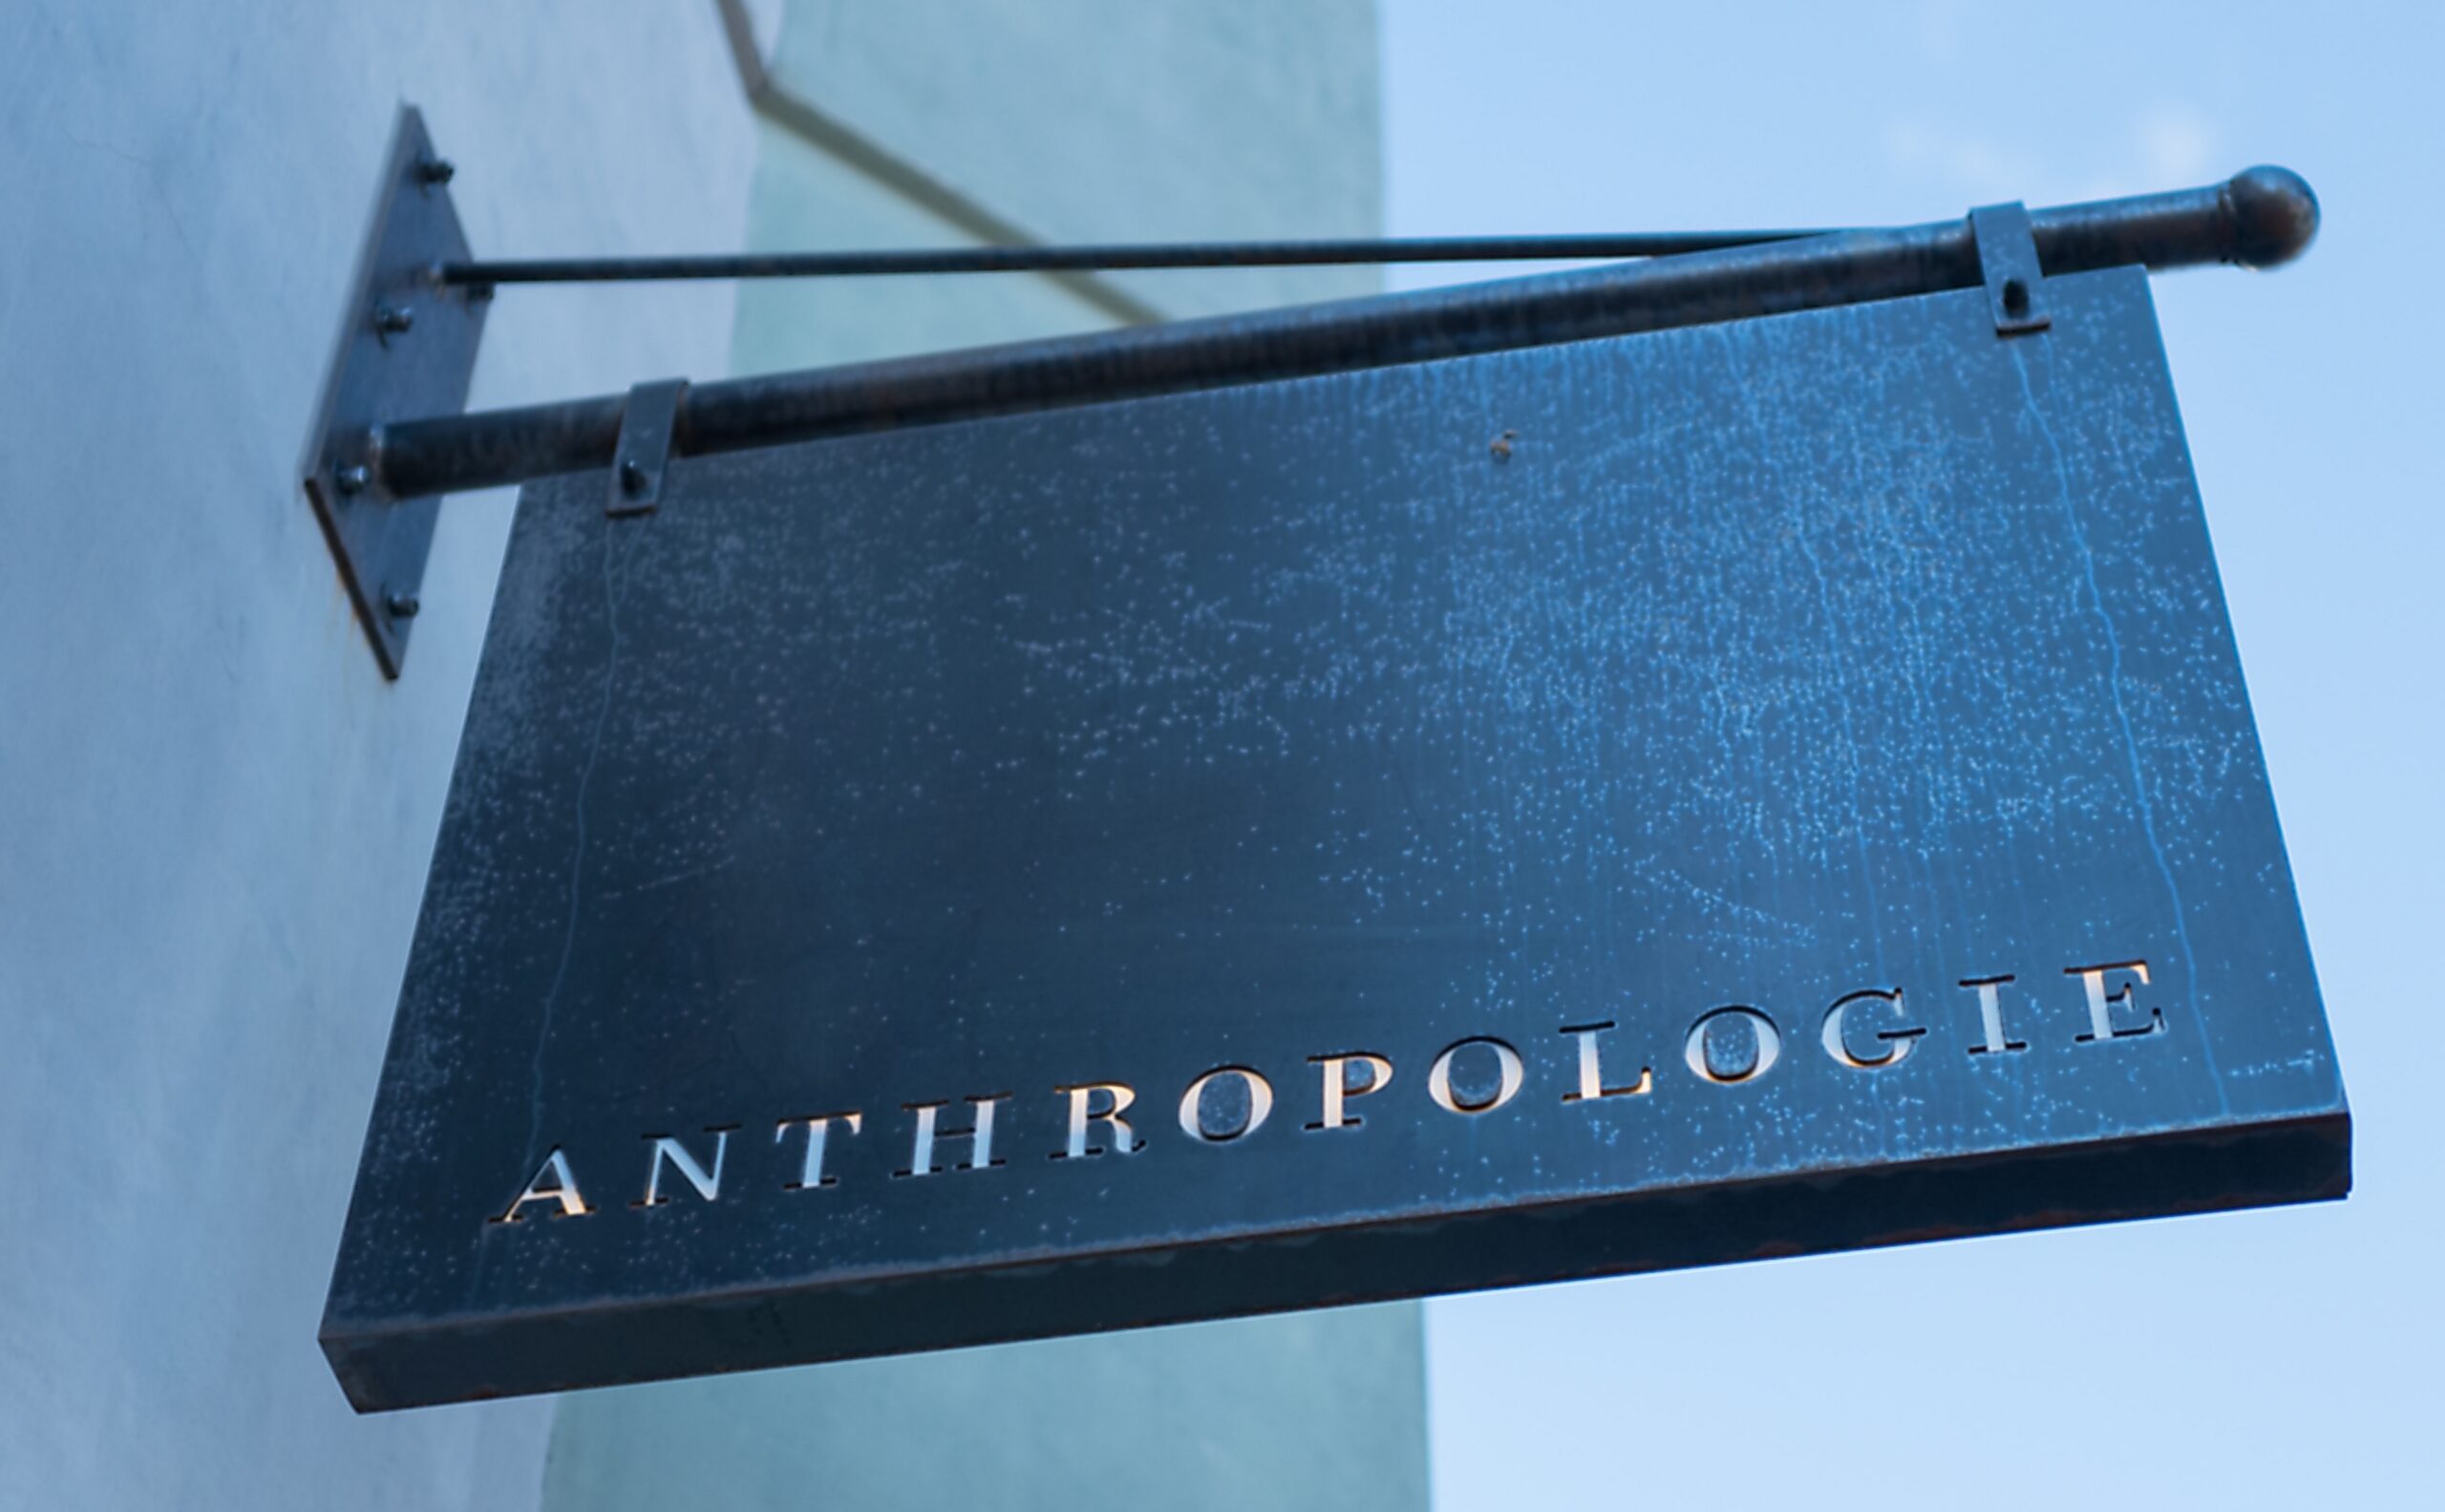 Anthropologie criticized for male model use, disables Instagram comments.